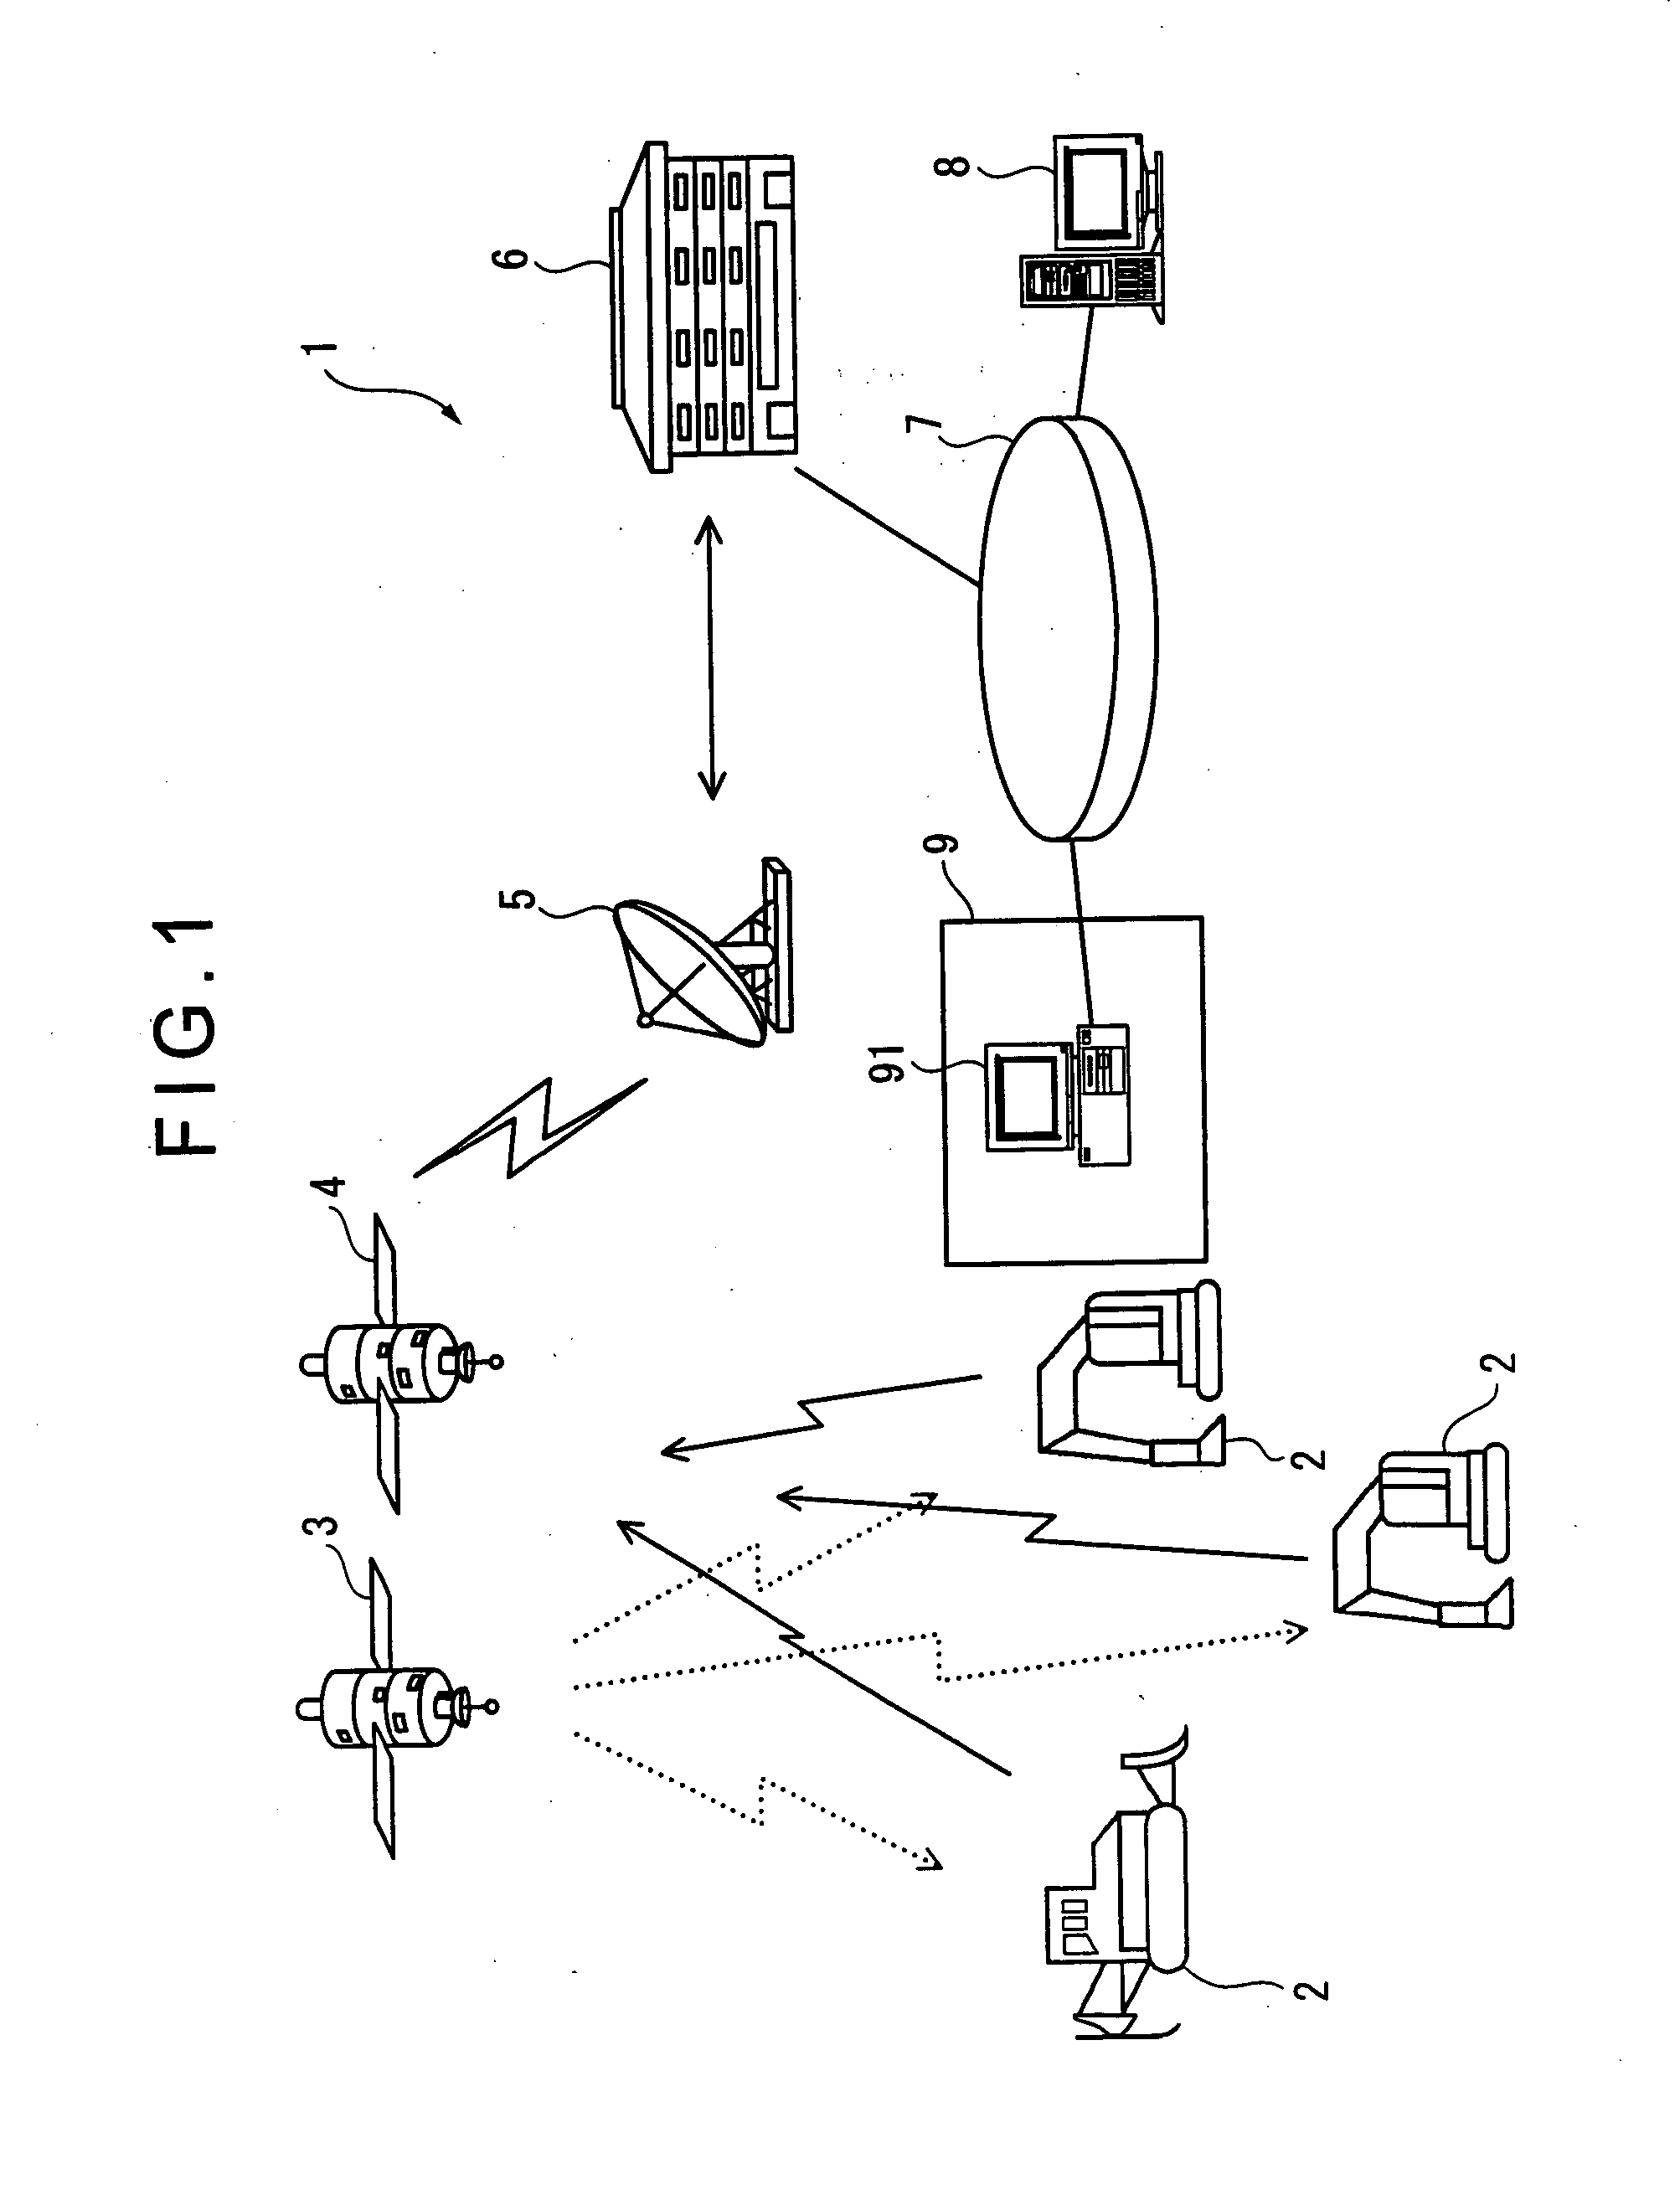 Supplemental parts production forecasting system, supplemental parts production forecasting method, and program for the same